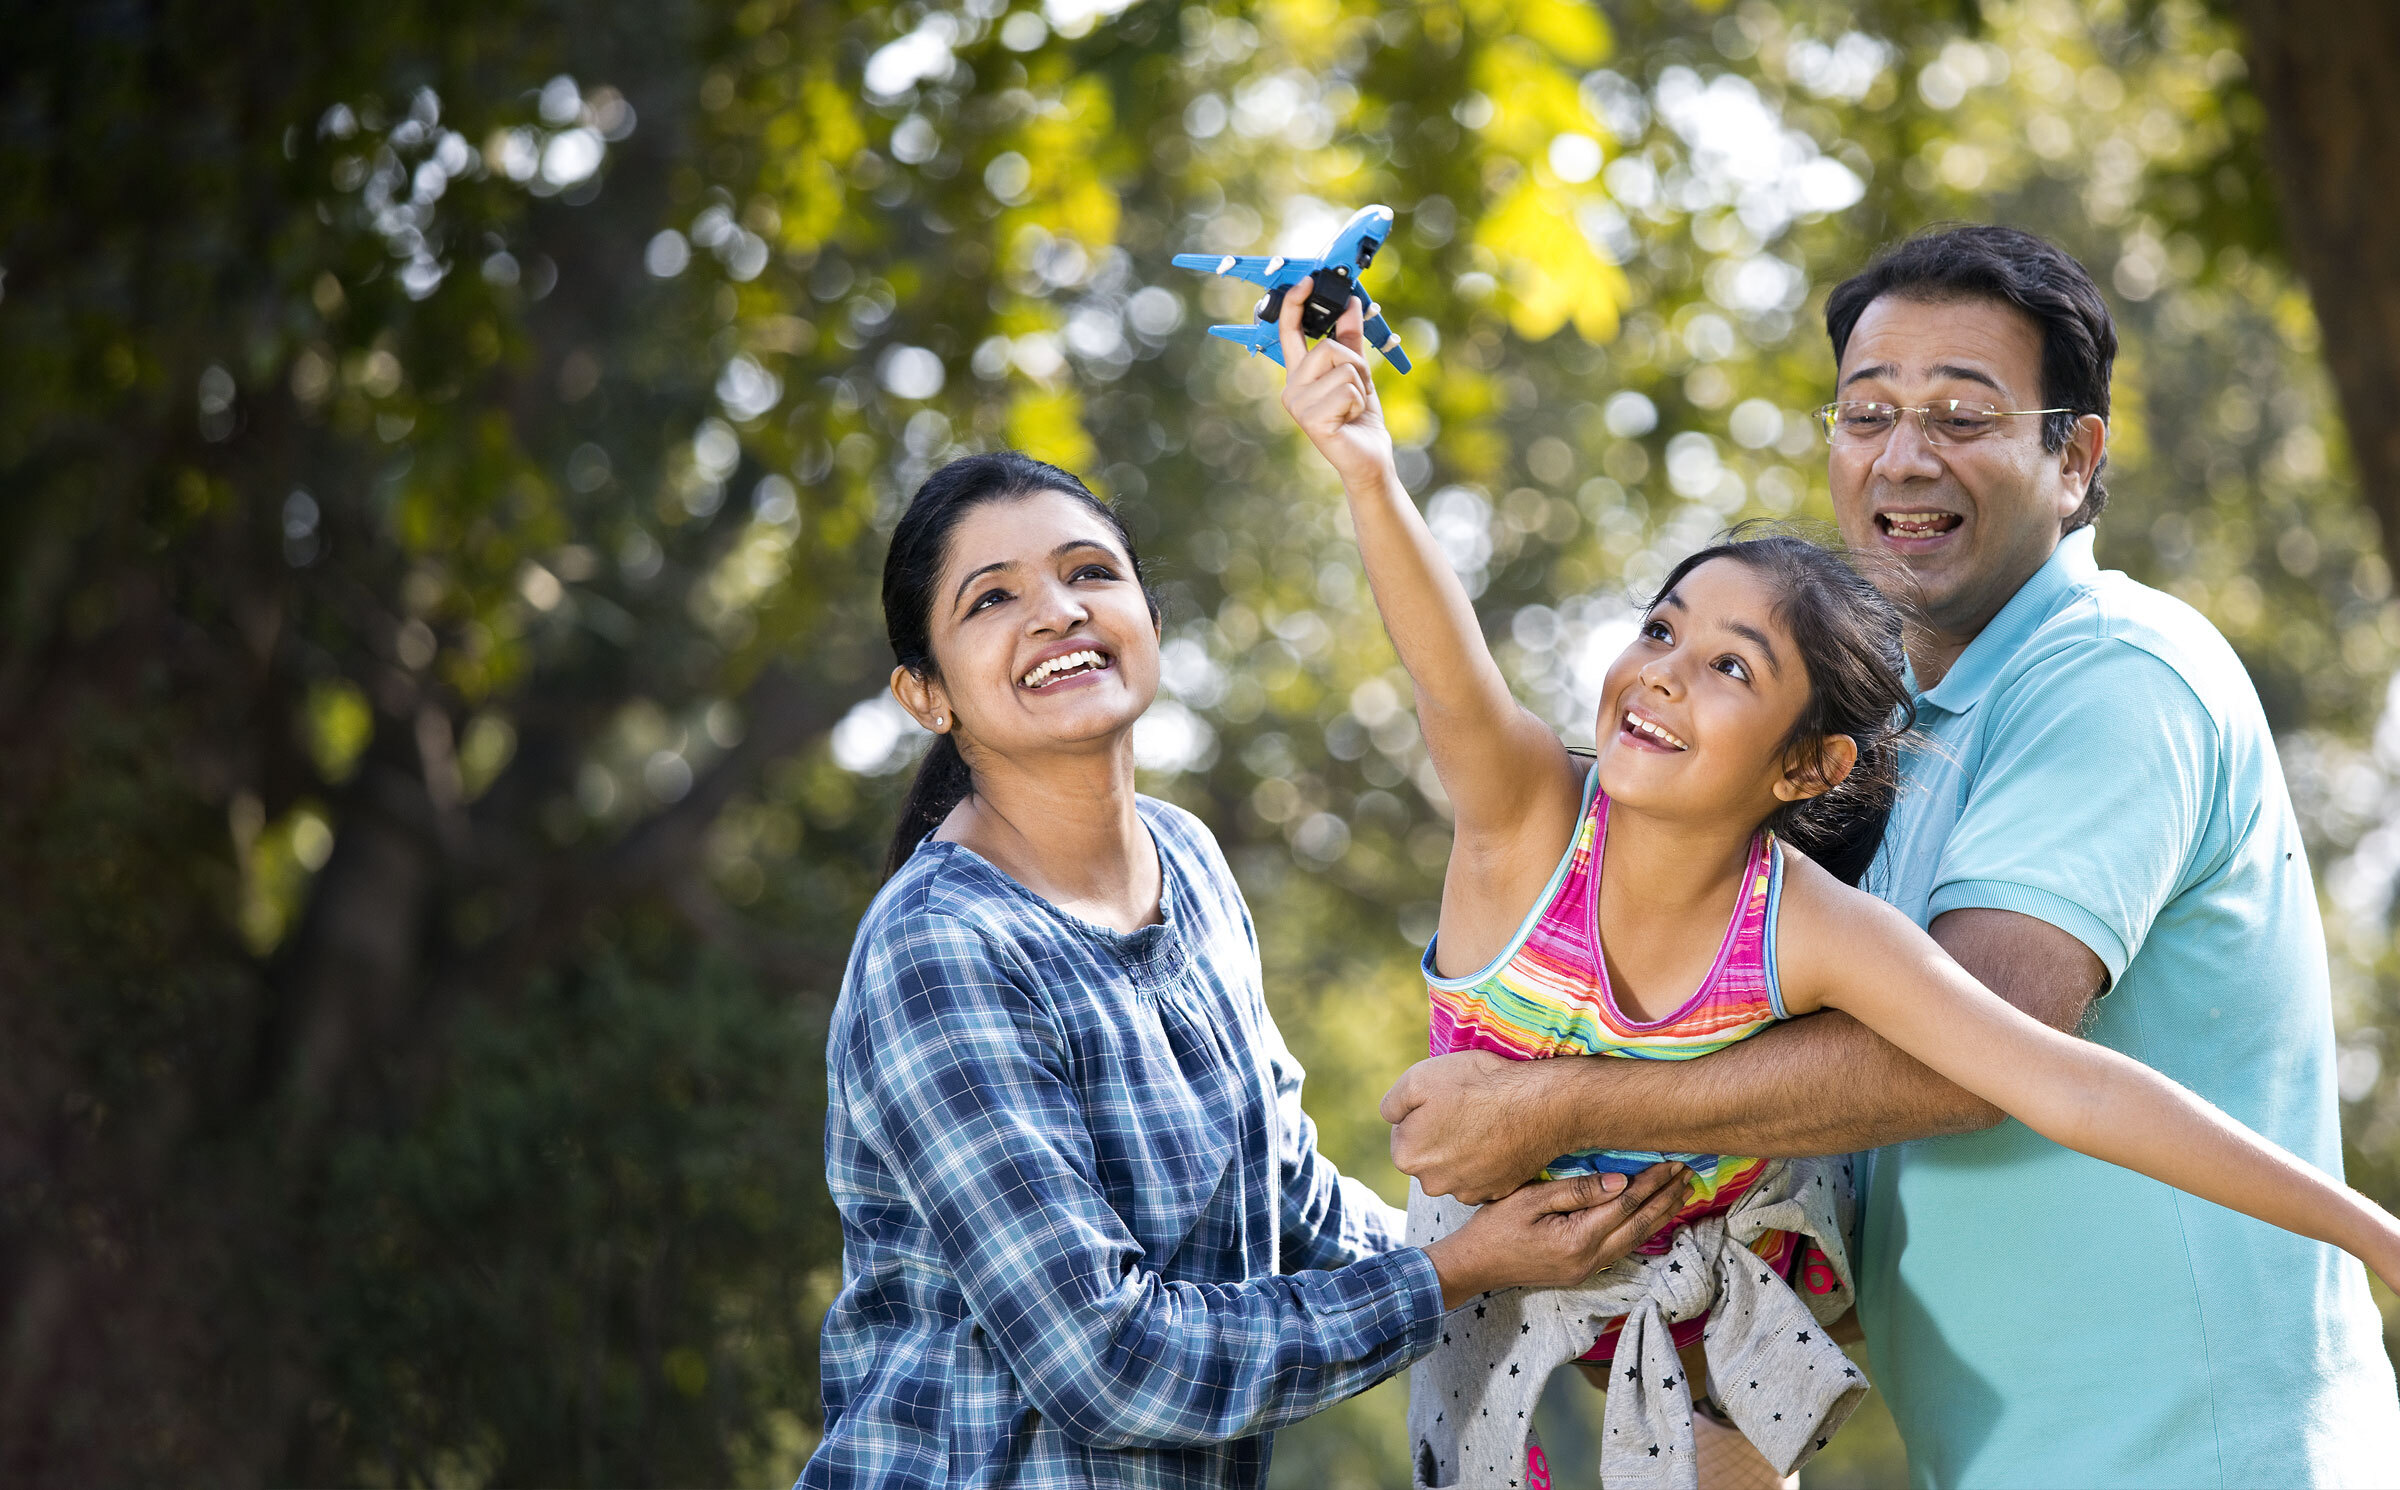 A smiling couple hold their daughter in their arms while she lifts a toy plane up to the sky, surrounded by trees.